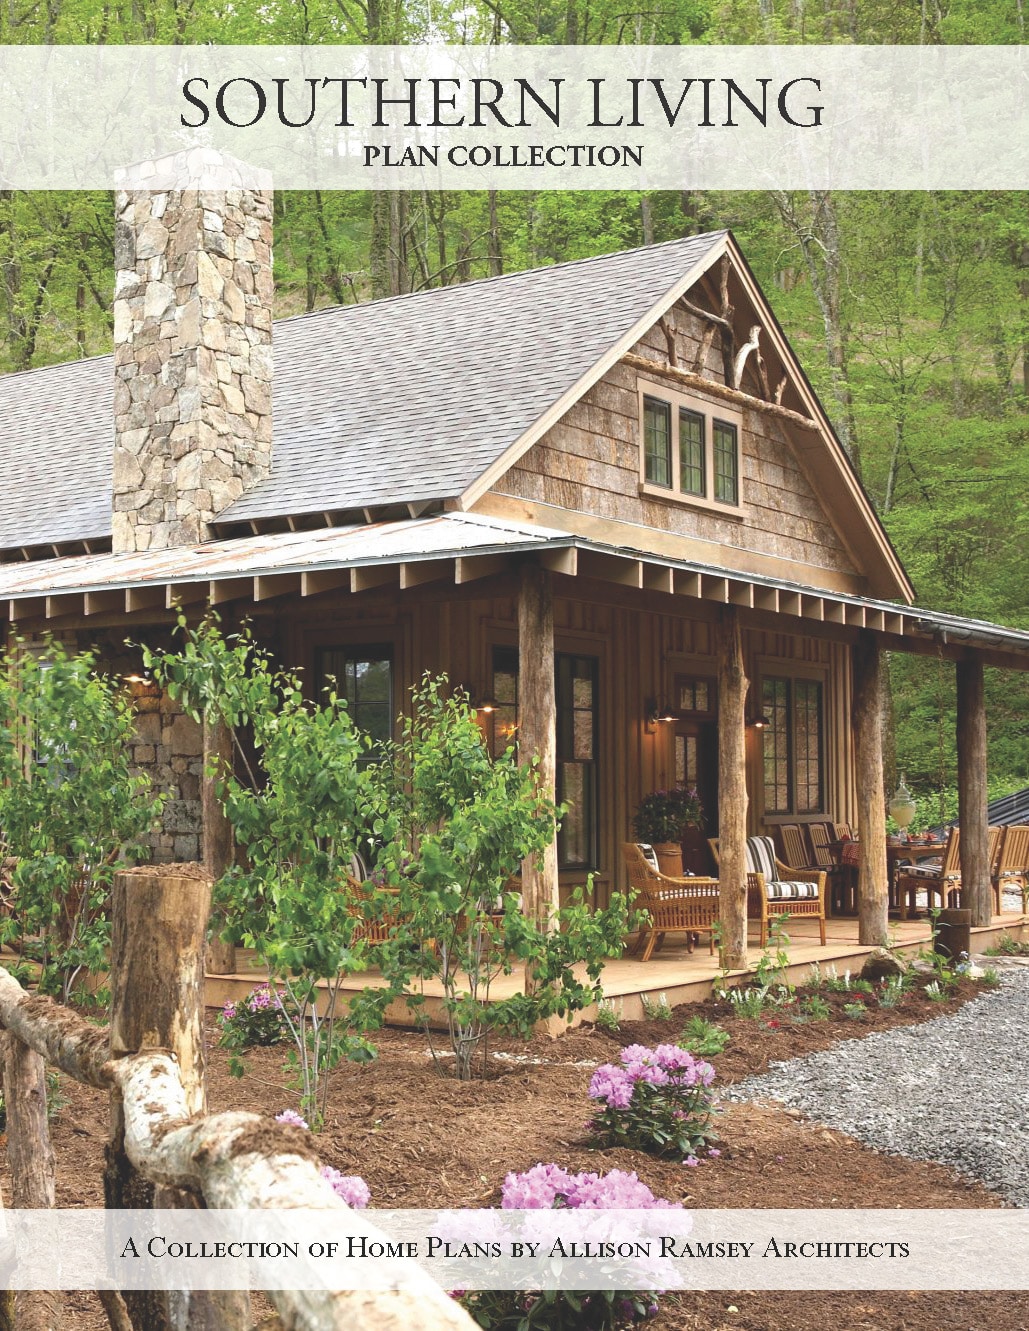 Southern Living House Plan Collection